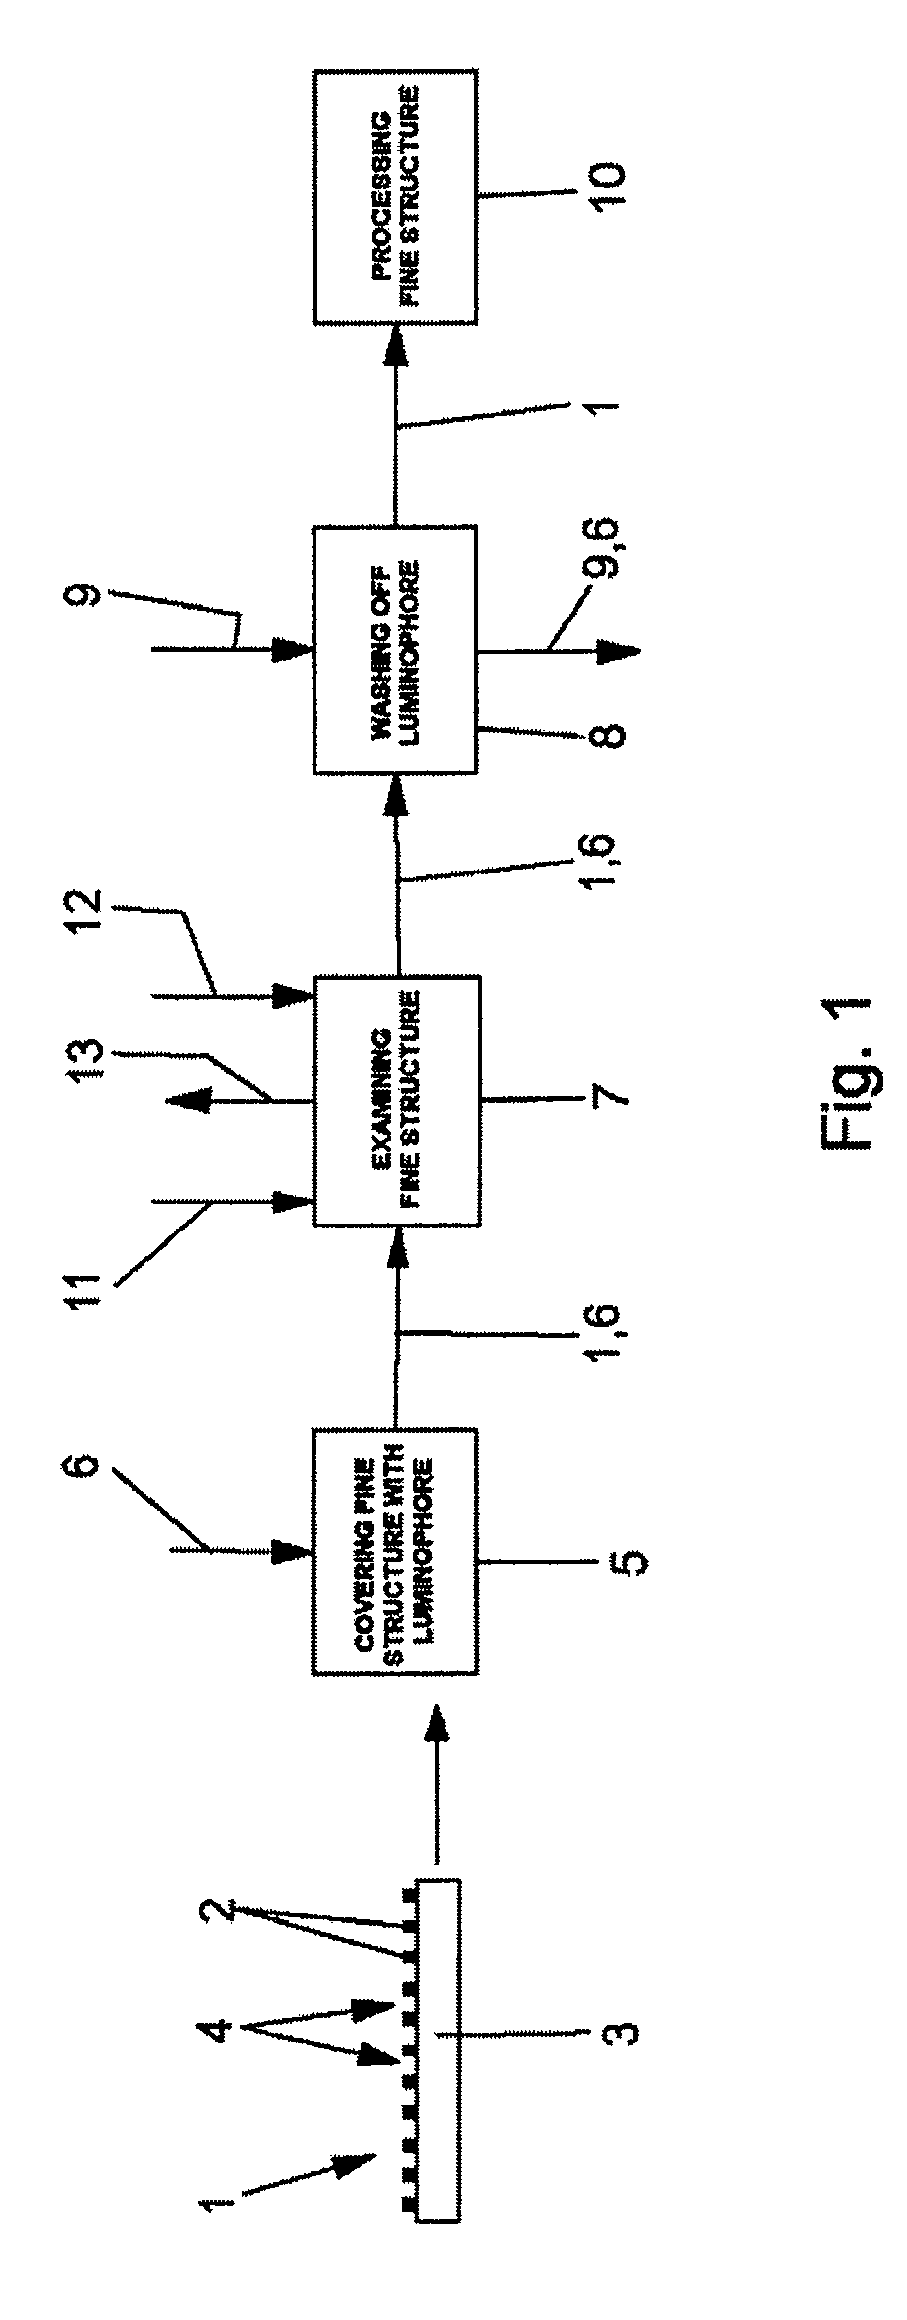 Method of microscopically examining a spatial finestructure